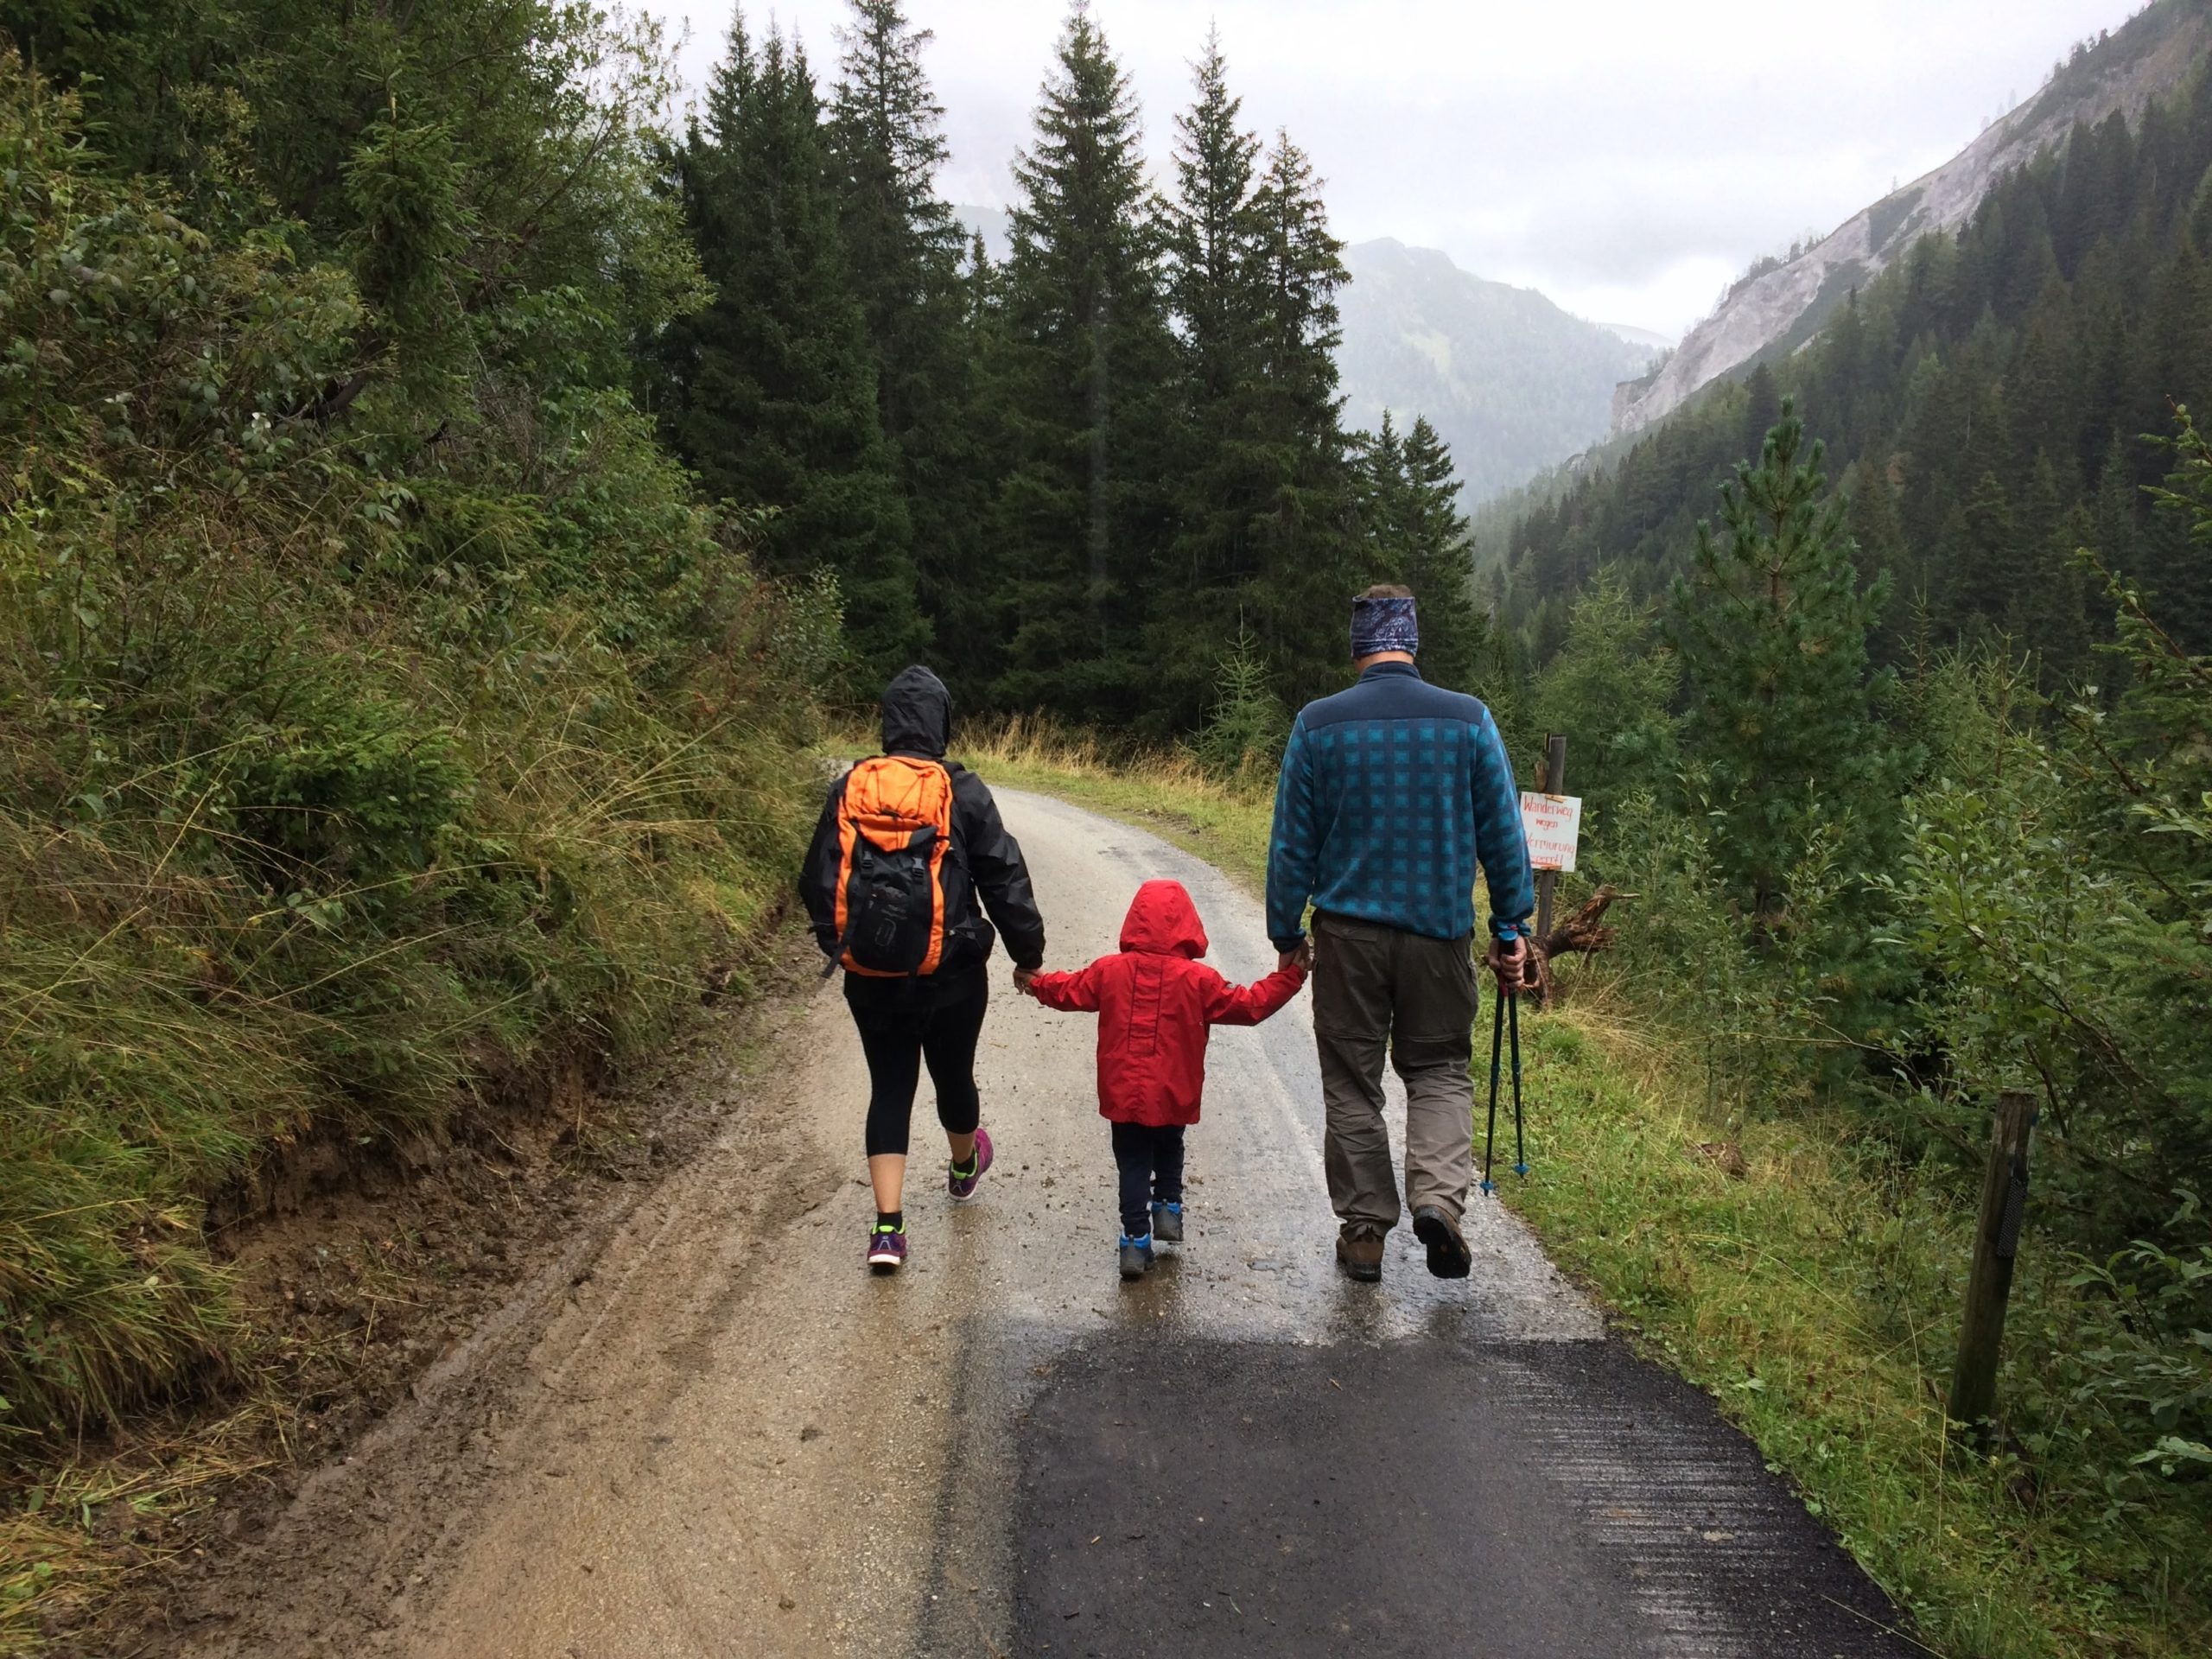 Two parents walking in the rain and with child inbetween them. Child has bright red raincoat on and everyone is holding hands. Walking along mountainous road